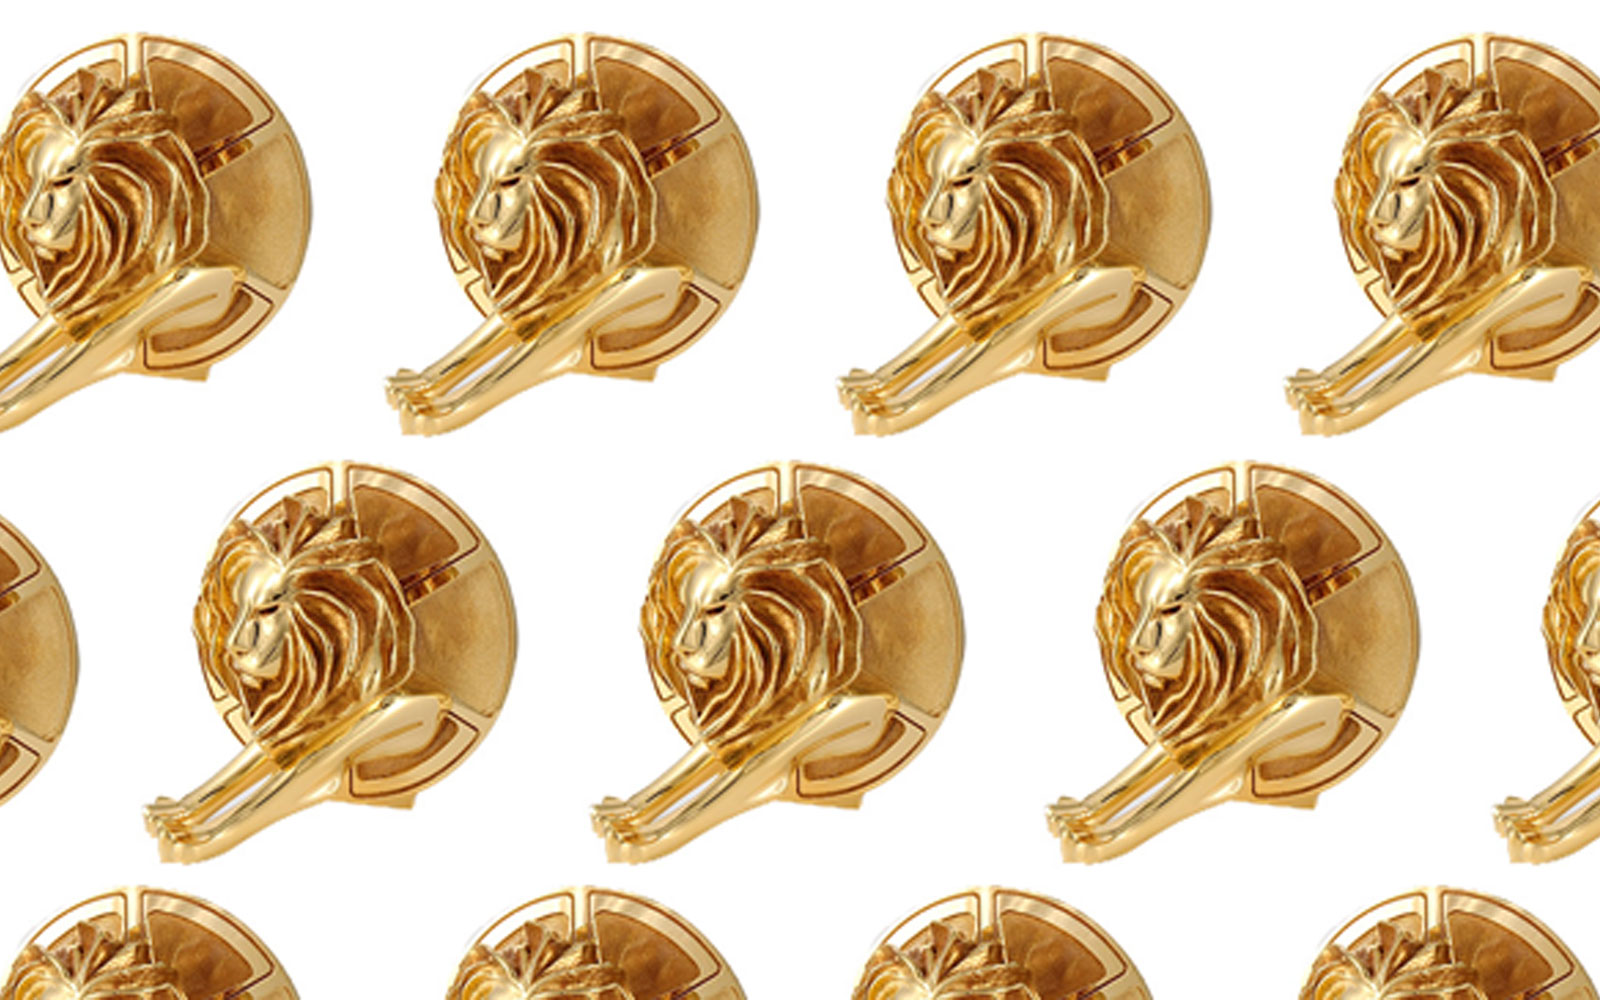 OMD’s Mark Murray Jones Shares His Takeaways From Serving as a Media Juror for the 2019 Cannes Lions